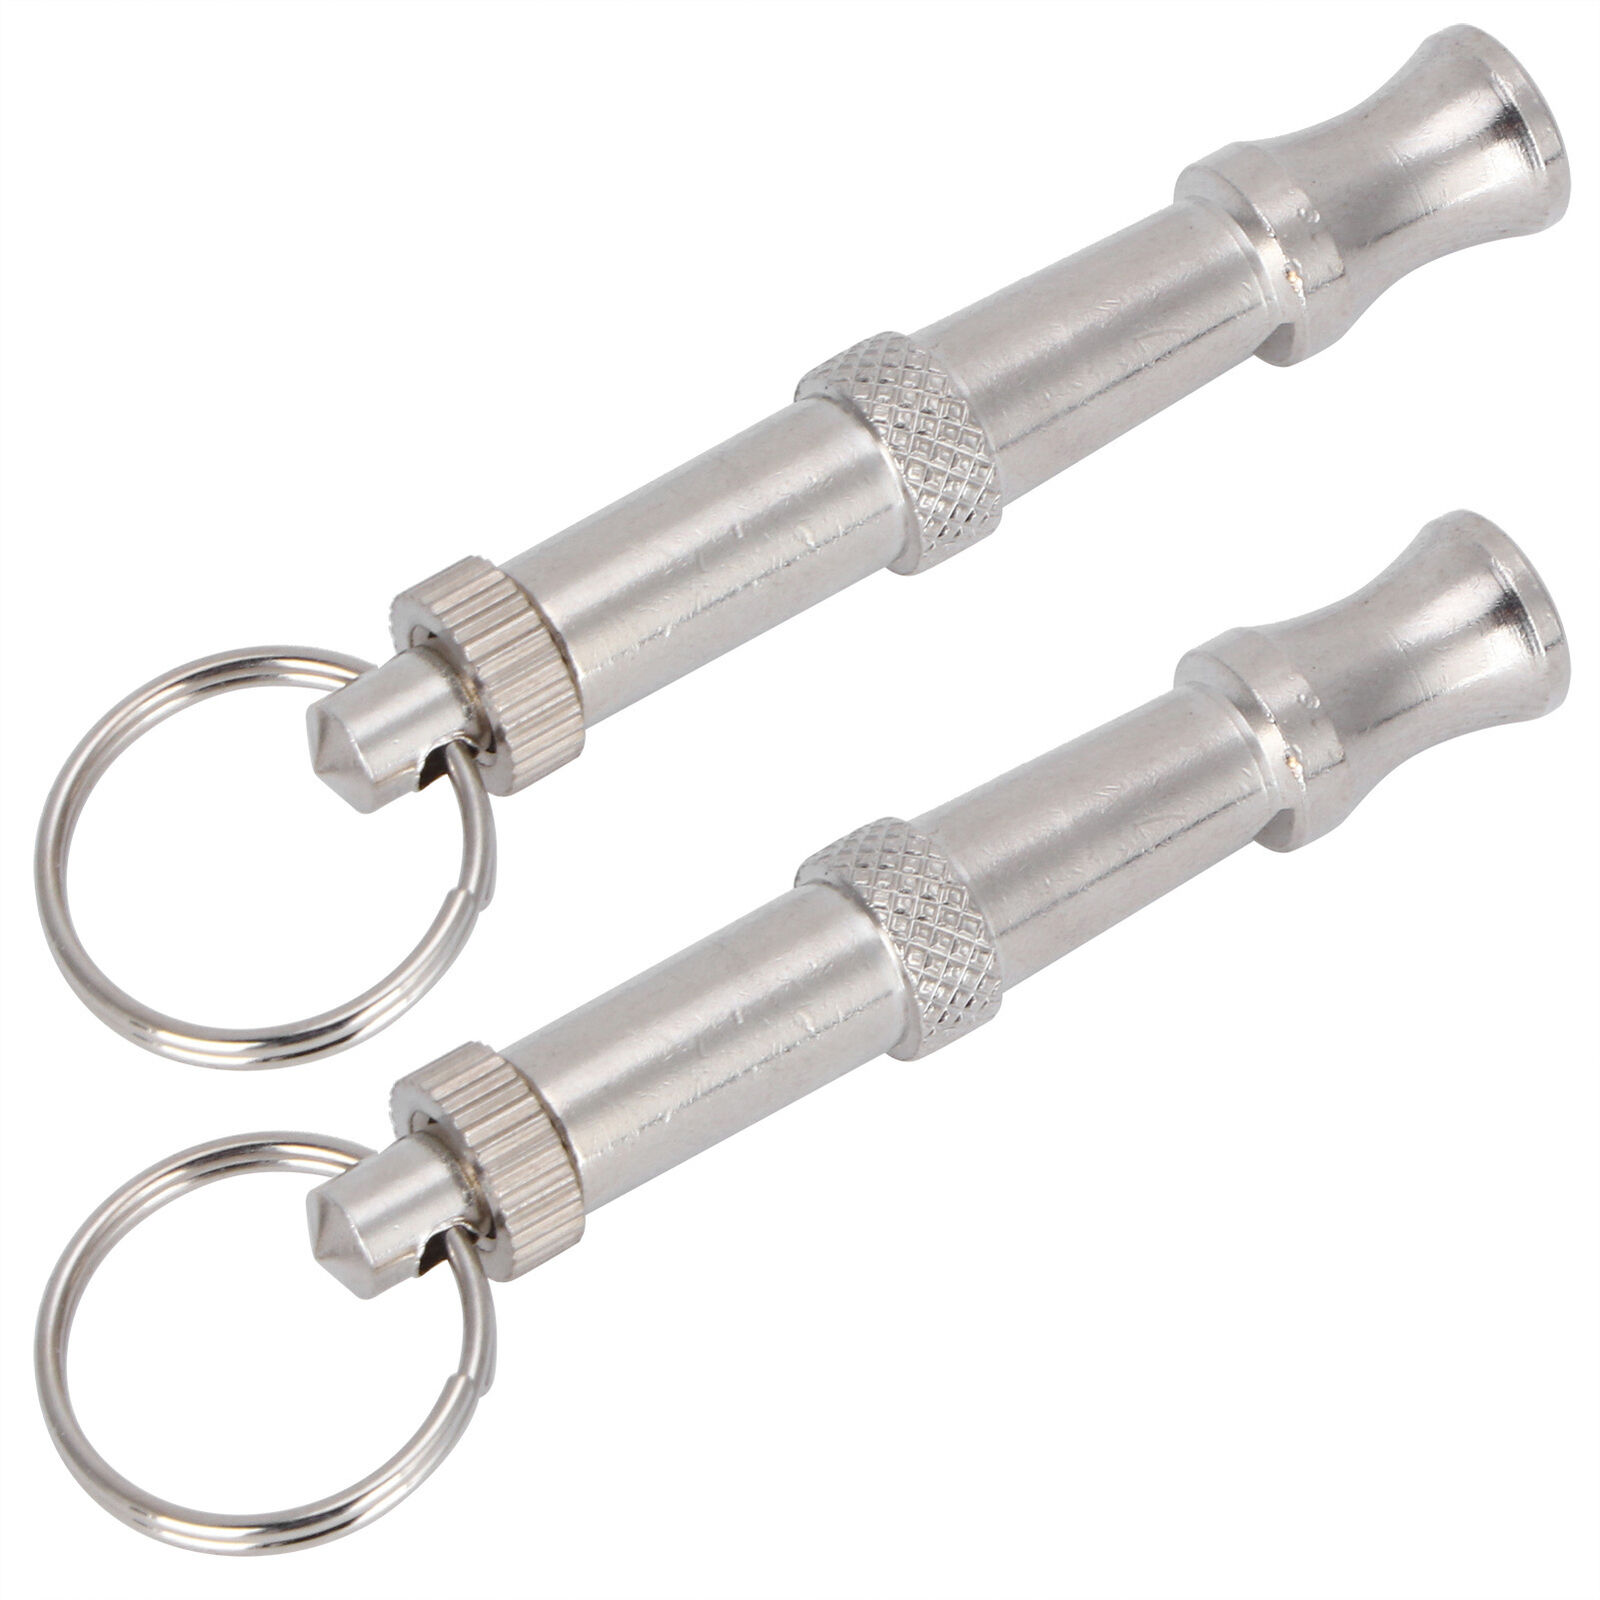 2pcs Stainless Steel Ultrasonic Whistle Portable Trainer Training Tool For AOS